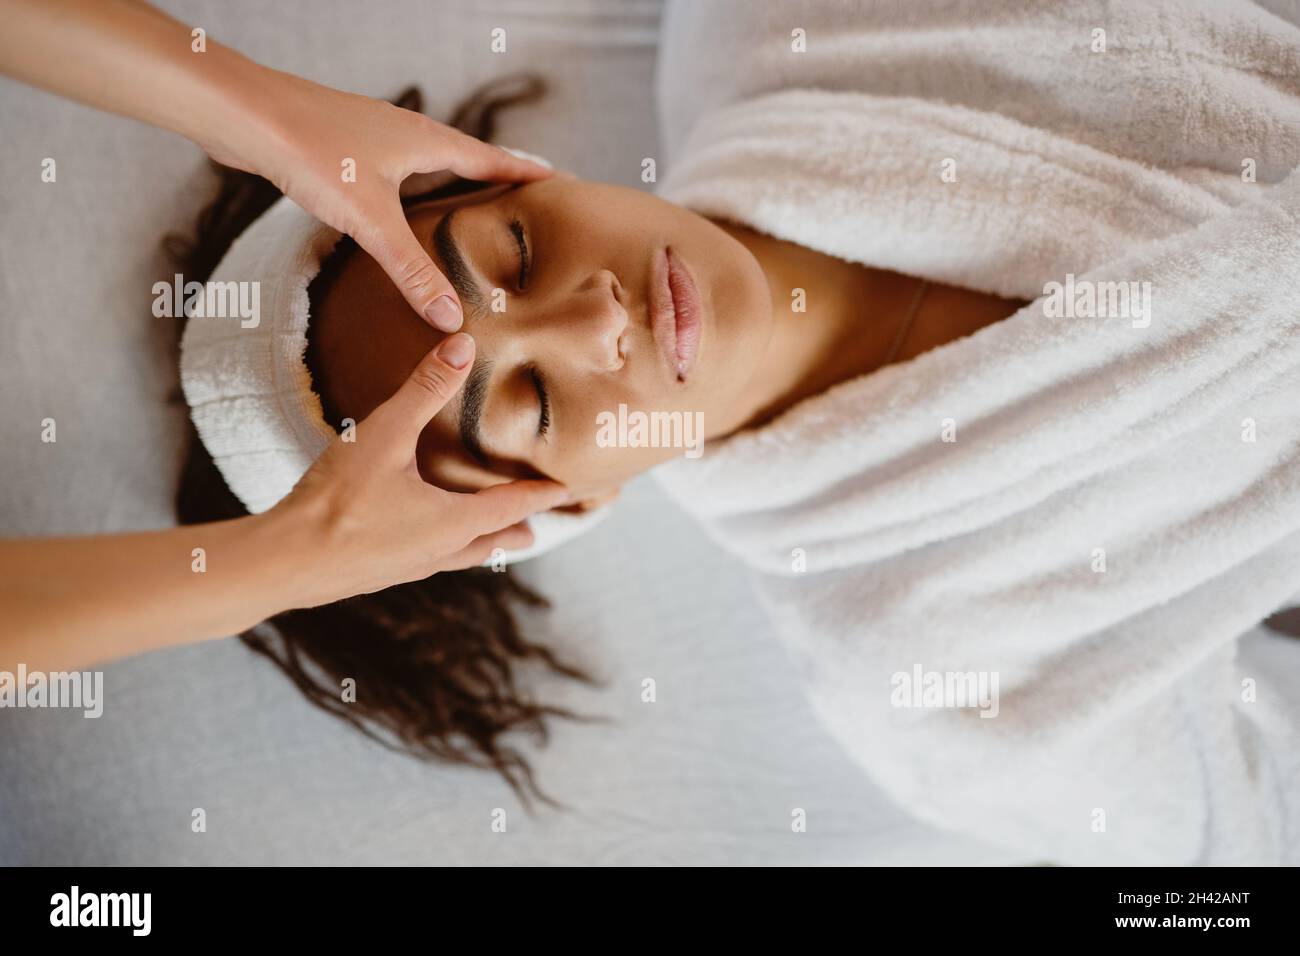 Top view of young African American woman getting a face treatment at spa salon. Stock Photo